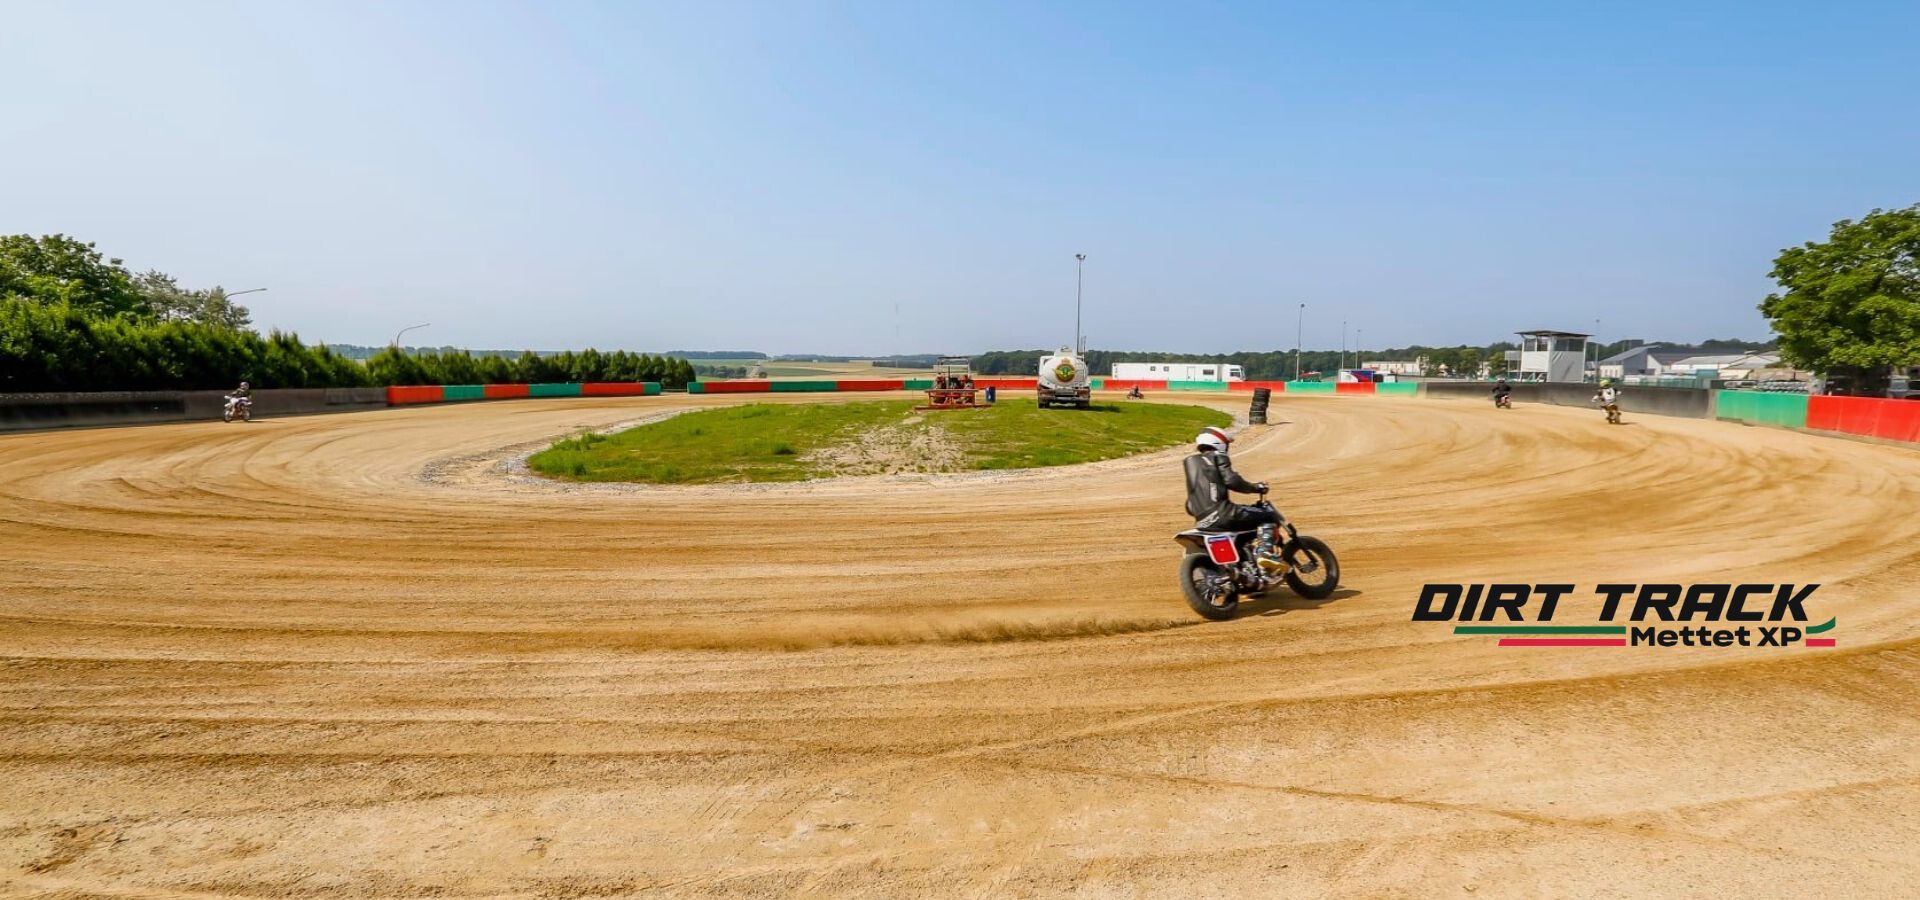 Mettet Dirt Experience - Track experience